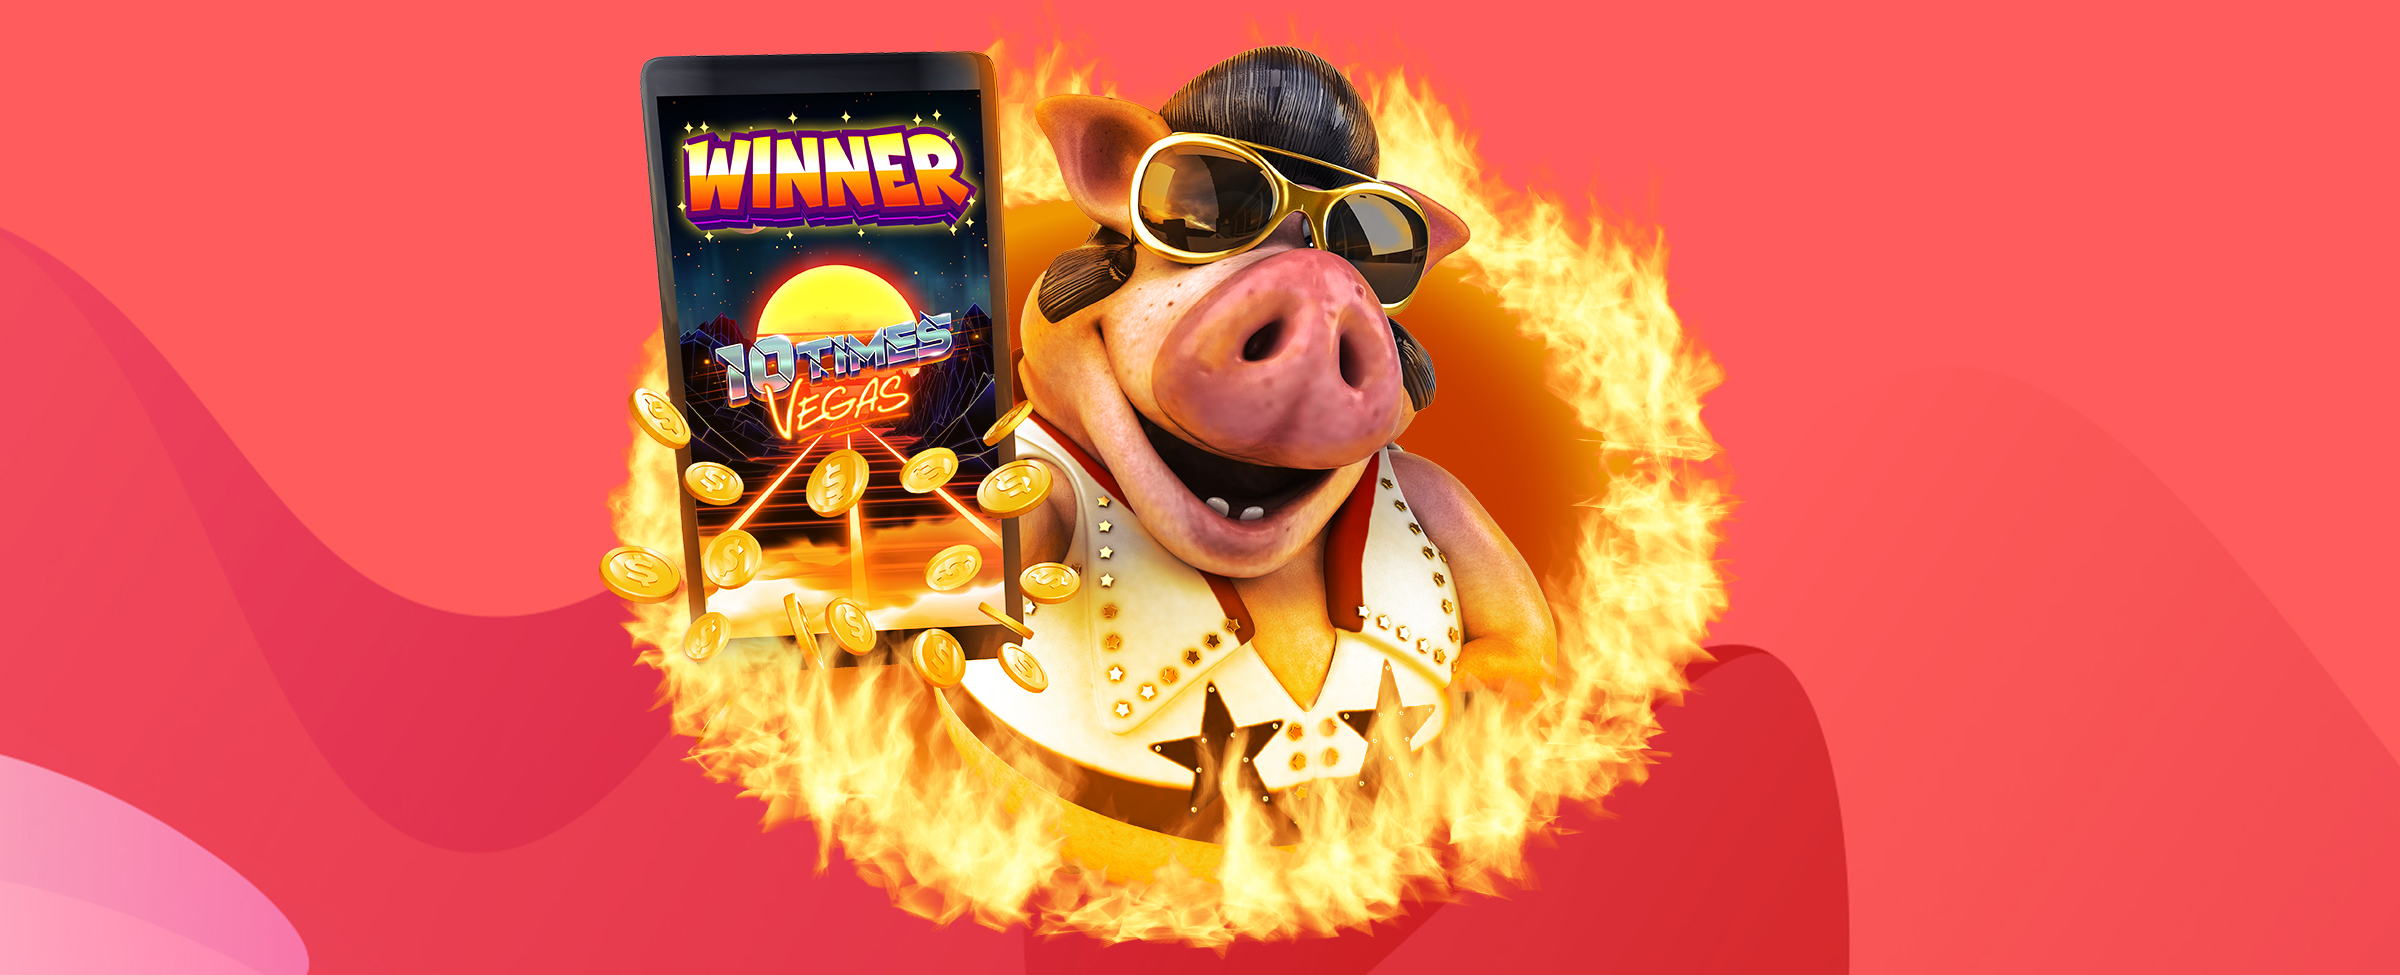 A 3D-animated pig dressed as Elvis protrudes through a ring of fire, holding up a large mobile phone showing a screenshot of the SlotsLV slots game “10 Times Vegas”, with the headline “winner”.